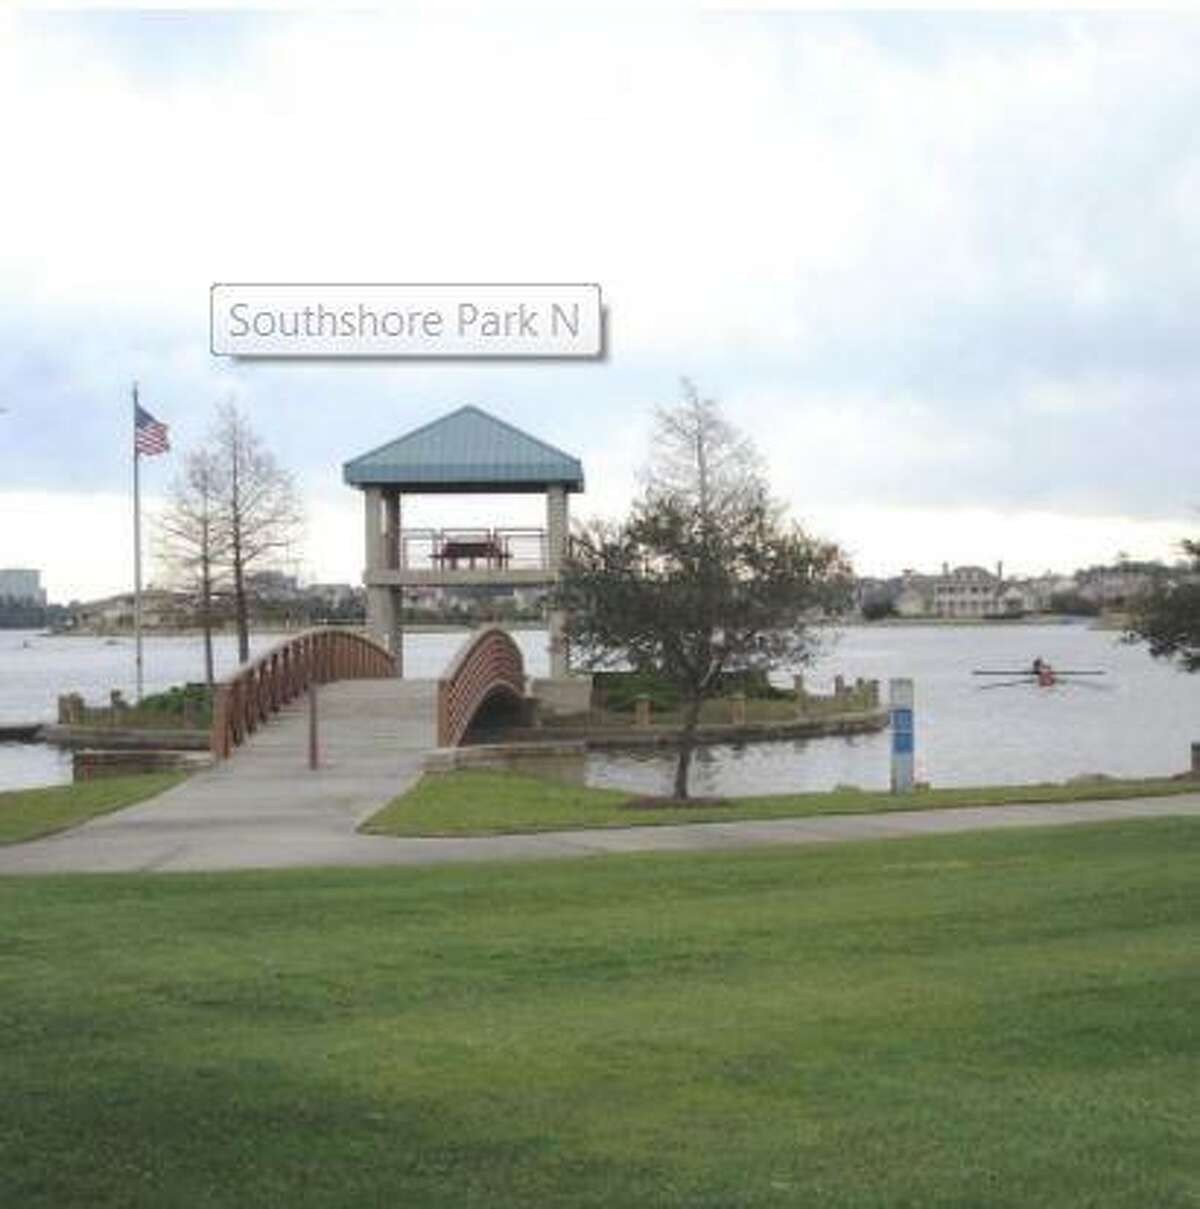 Southshore Park sits along Lake Woodlands in The Village of Panther Creek.